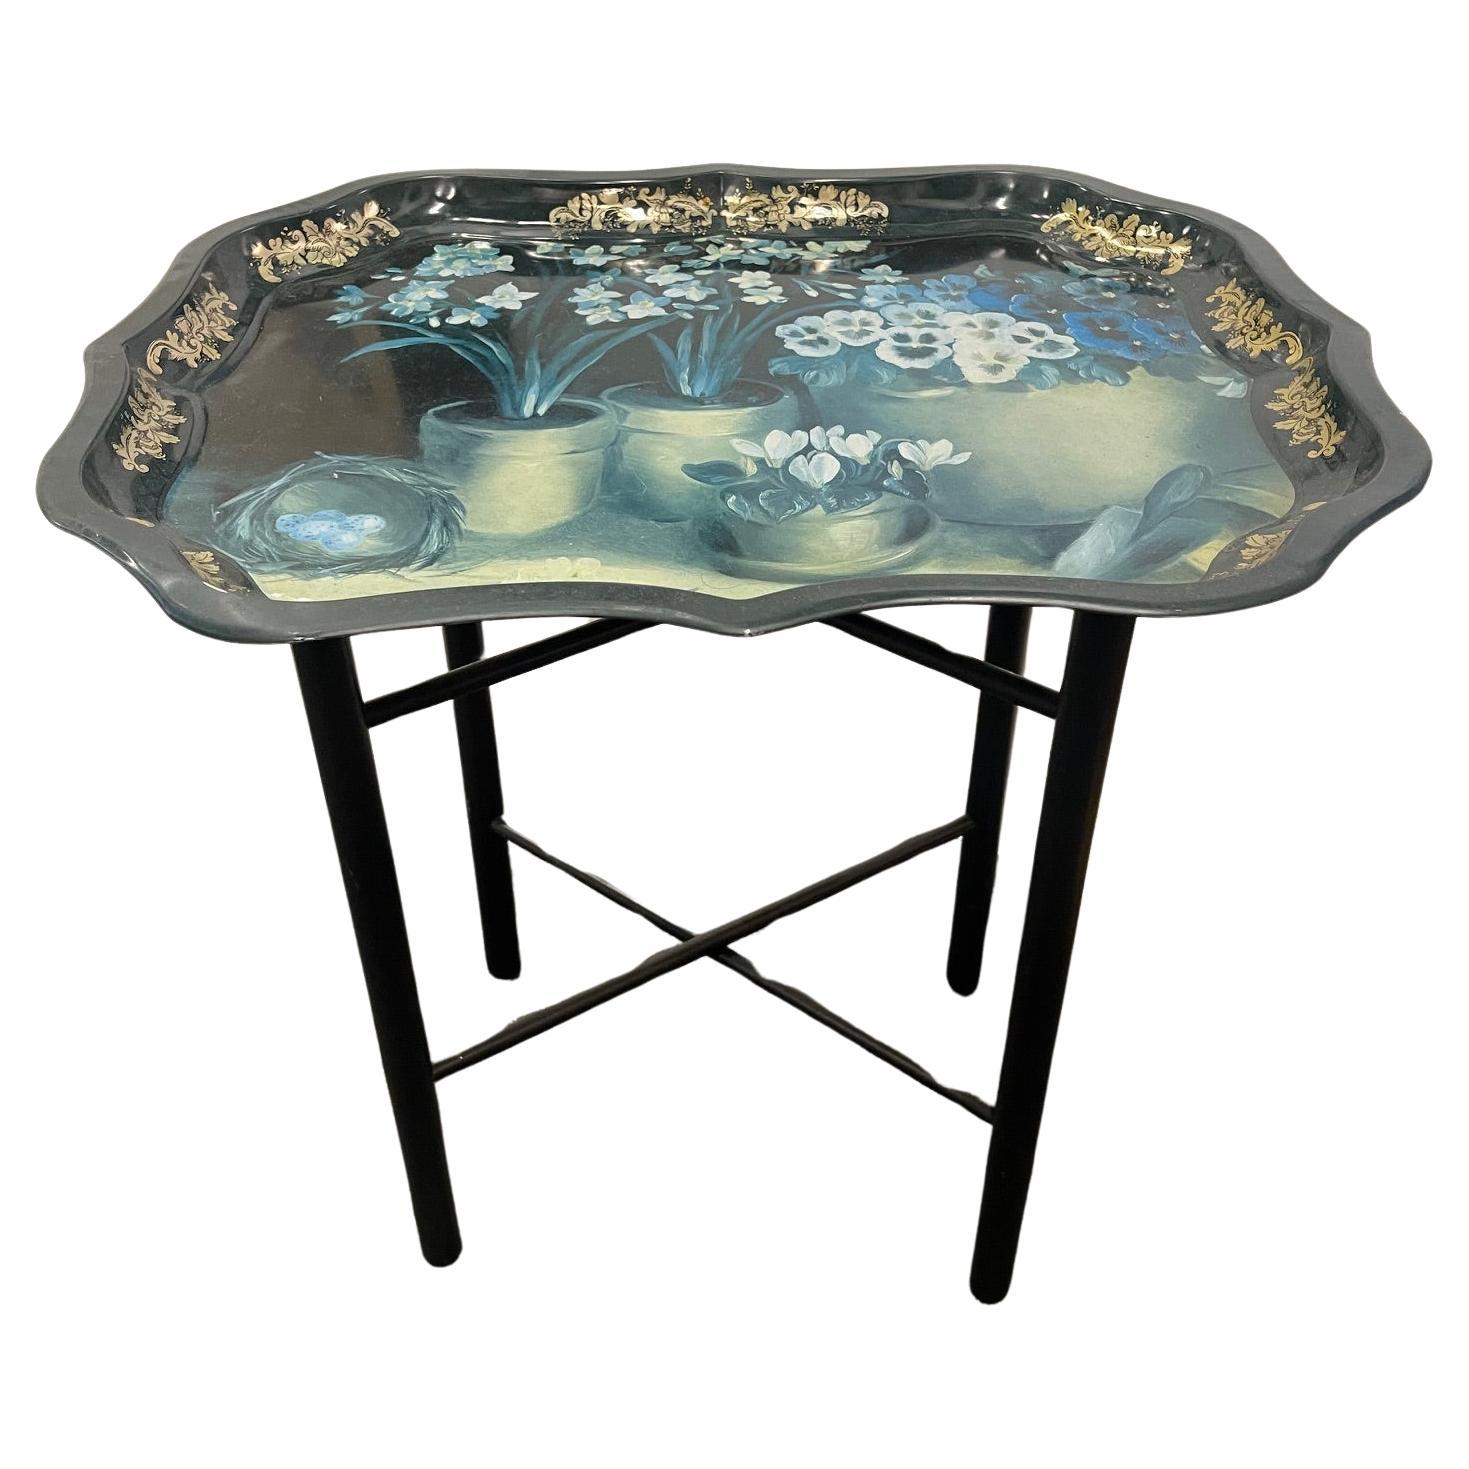 English Tole Tray Table with Floral Design, 20th Century